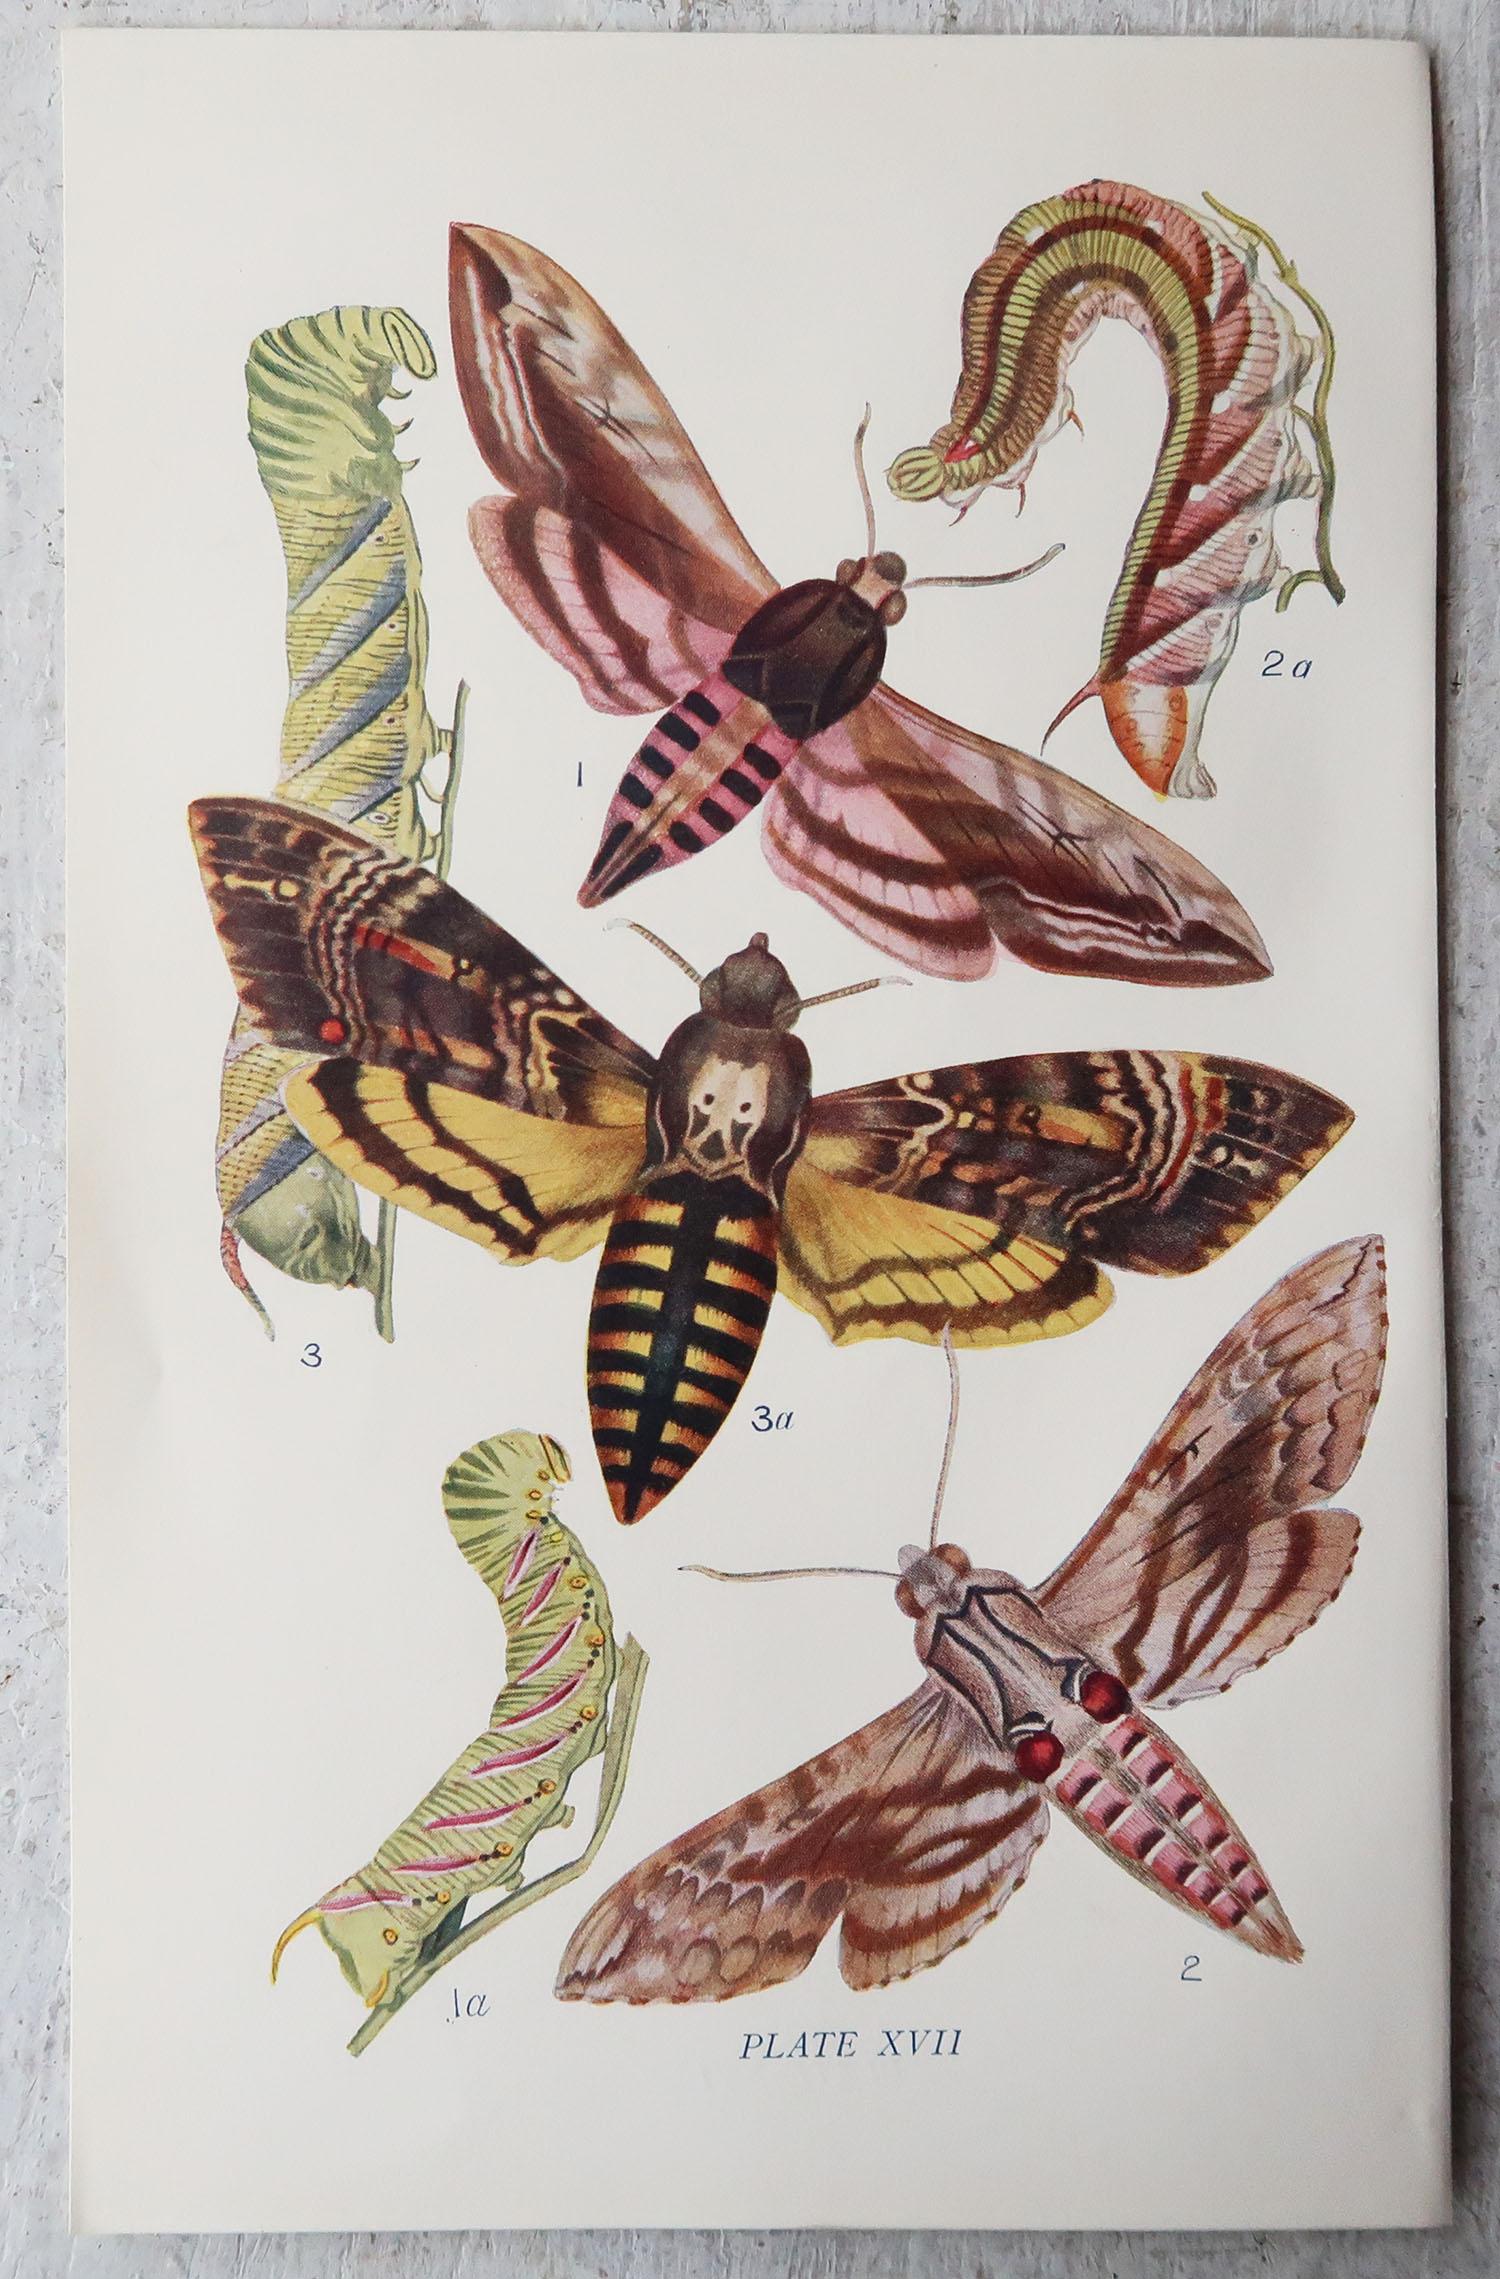 Great set of butterfly prints. 

Lithographs with original color

Published by Routledge, circa 1900

Unframed.

